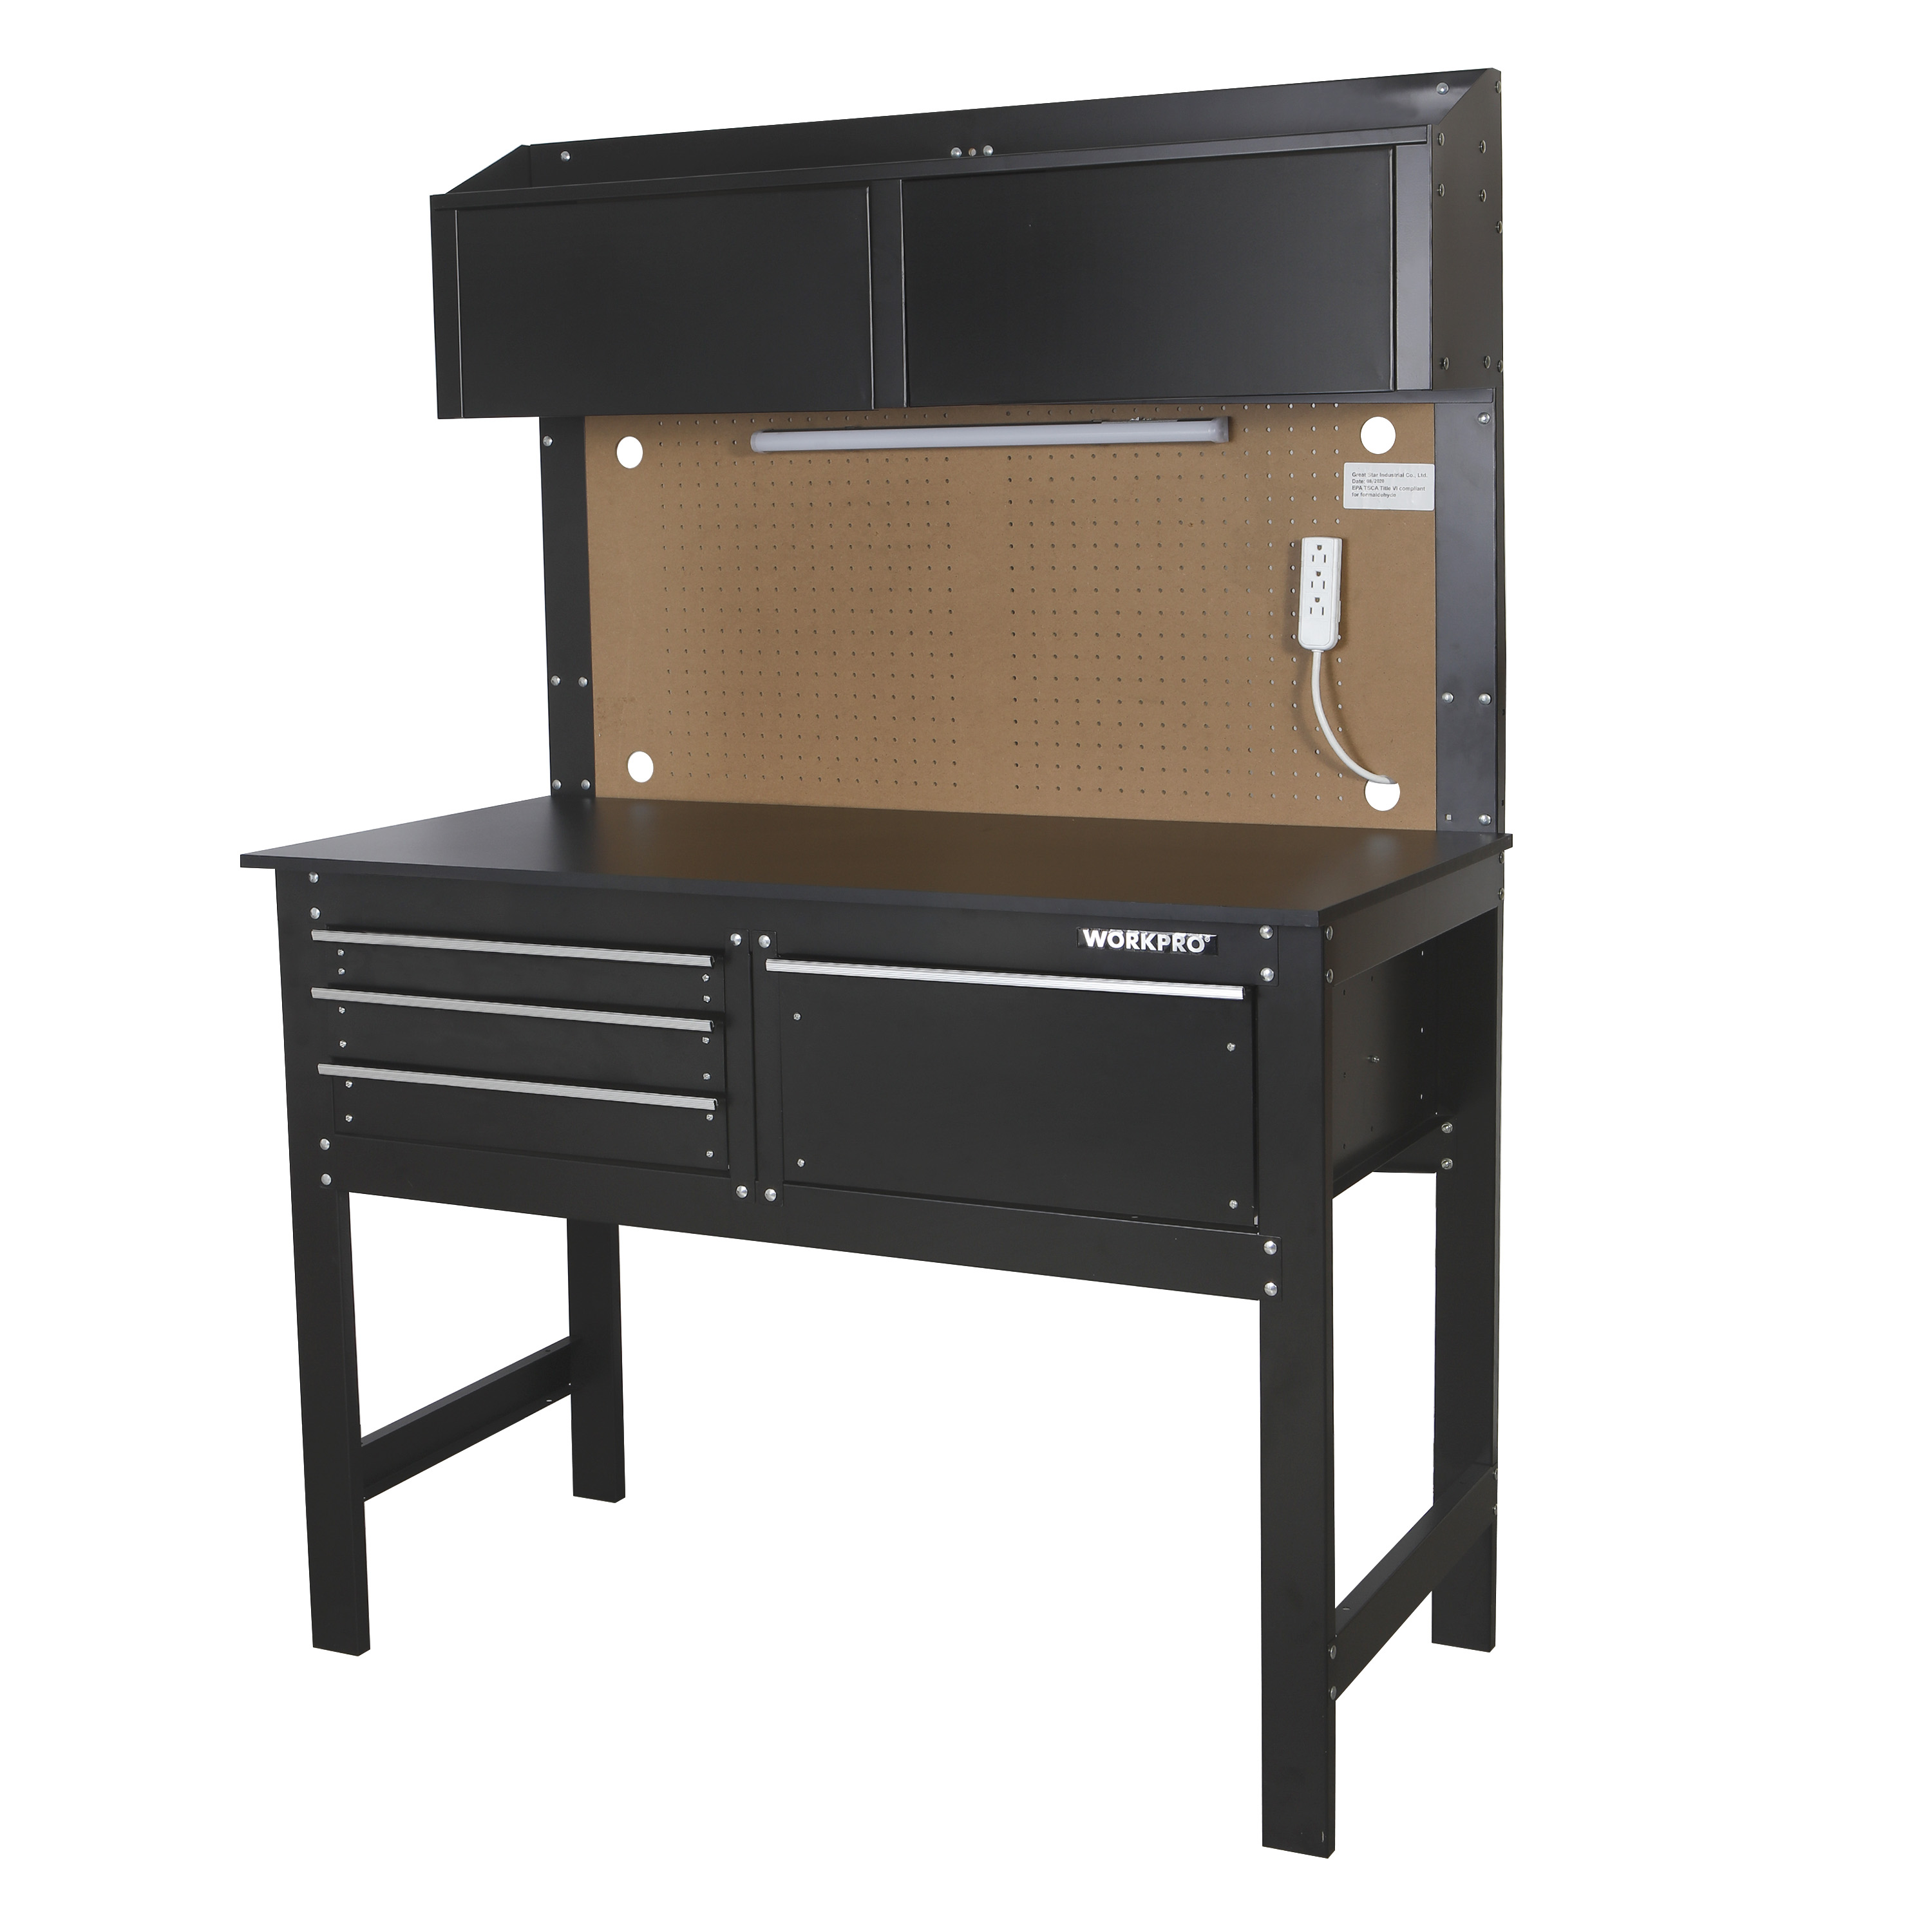 WORKPRO 2-in-1 48-Inch Workbench and Cabinet Combo with Light, Steel, Wood - Walmart.com $199.97